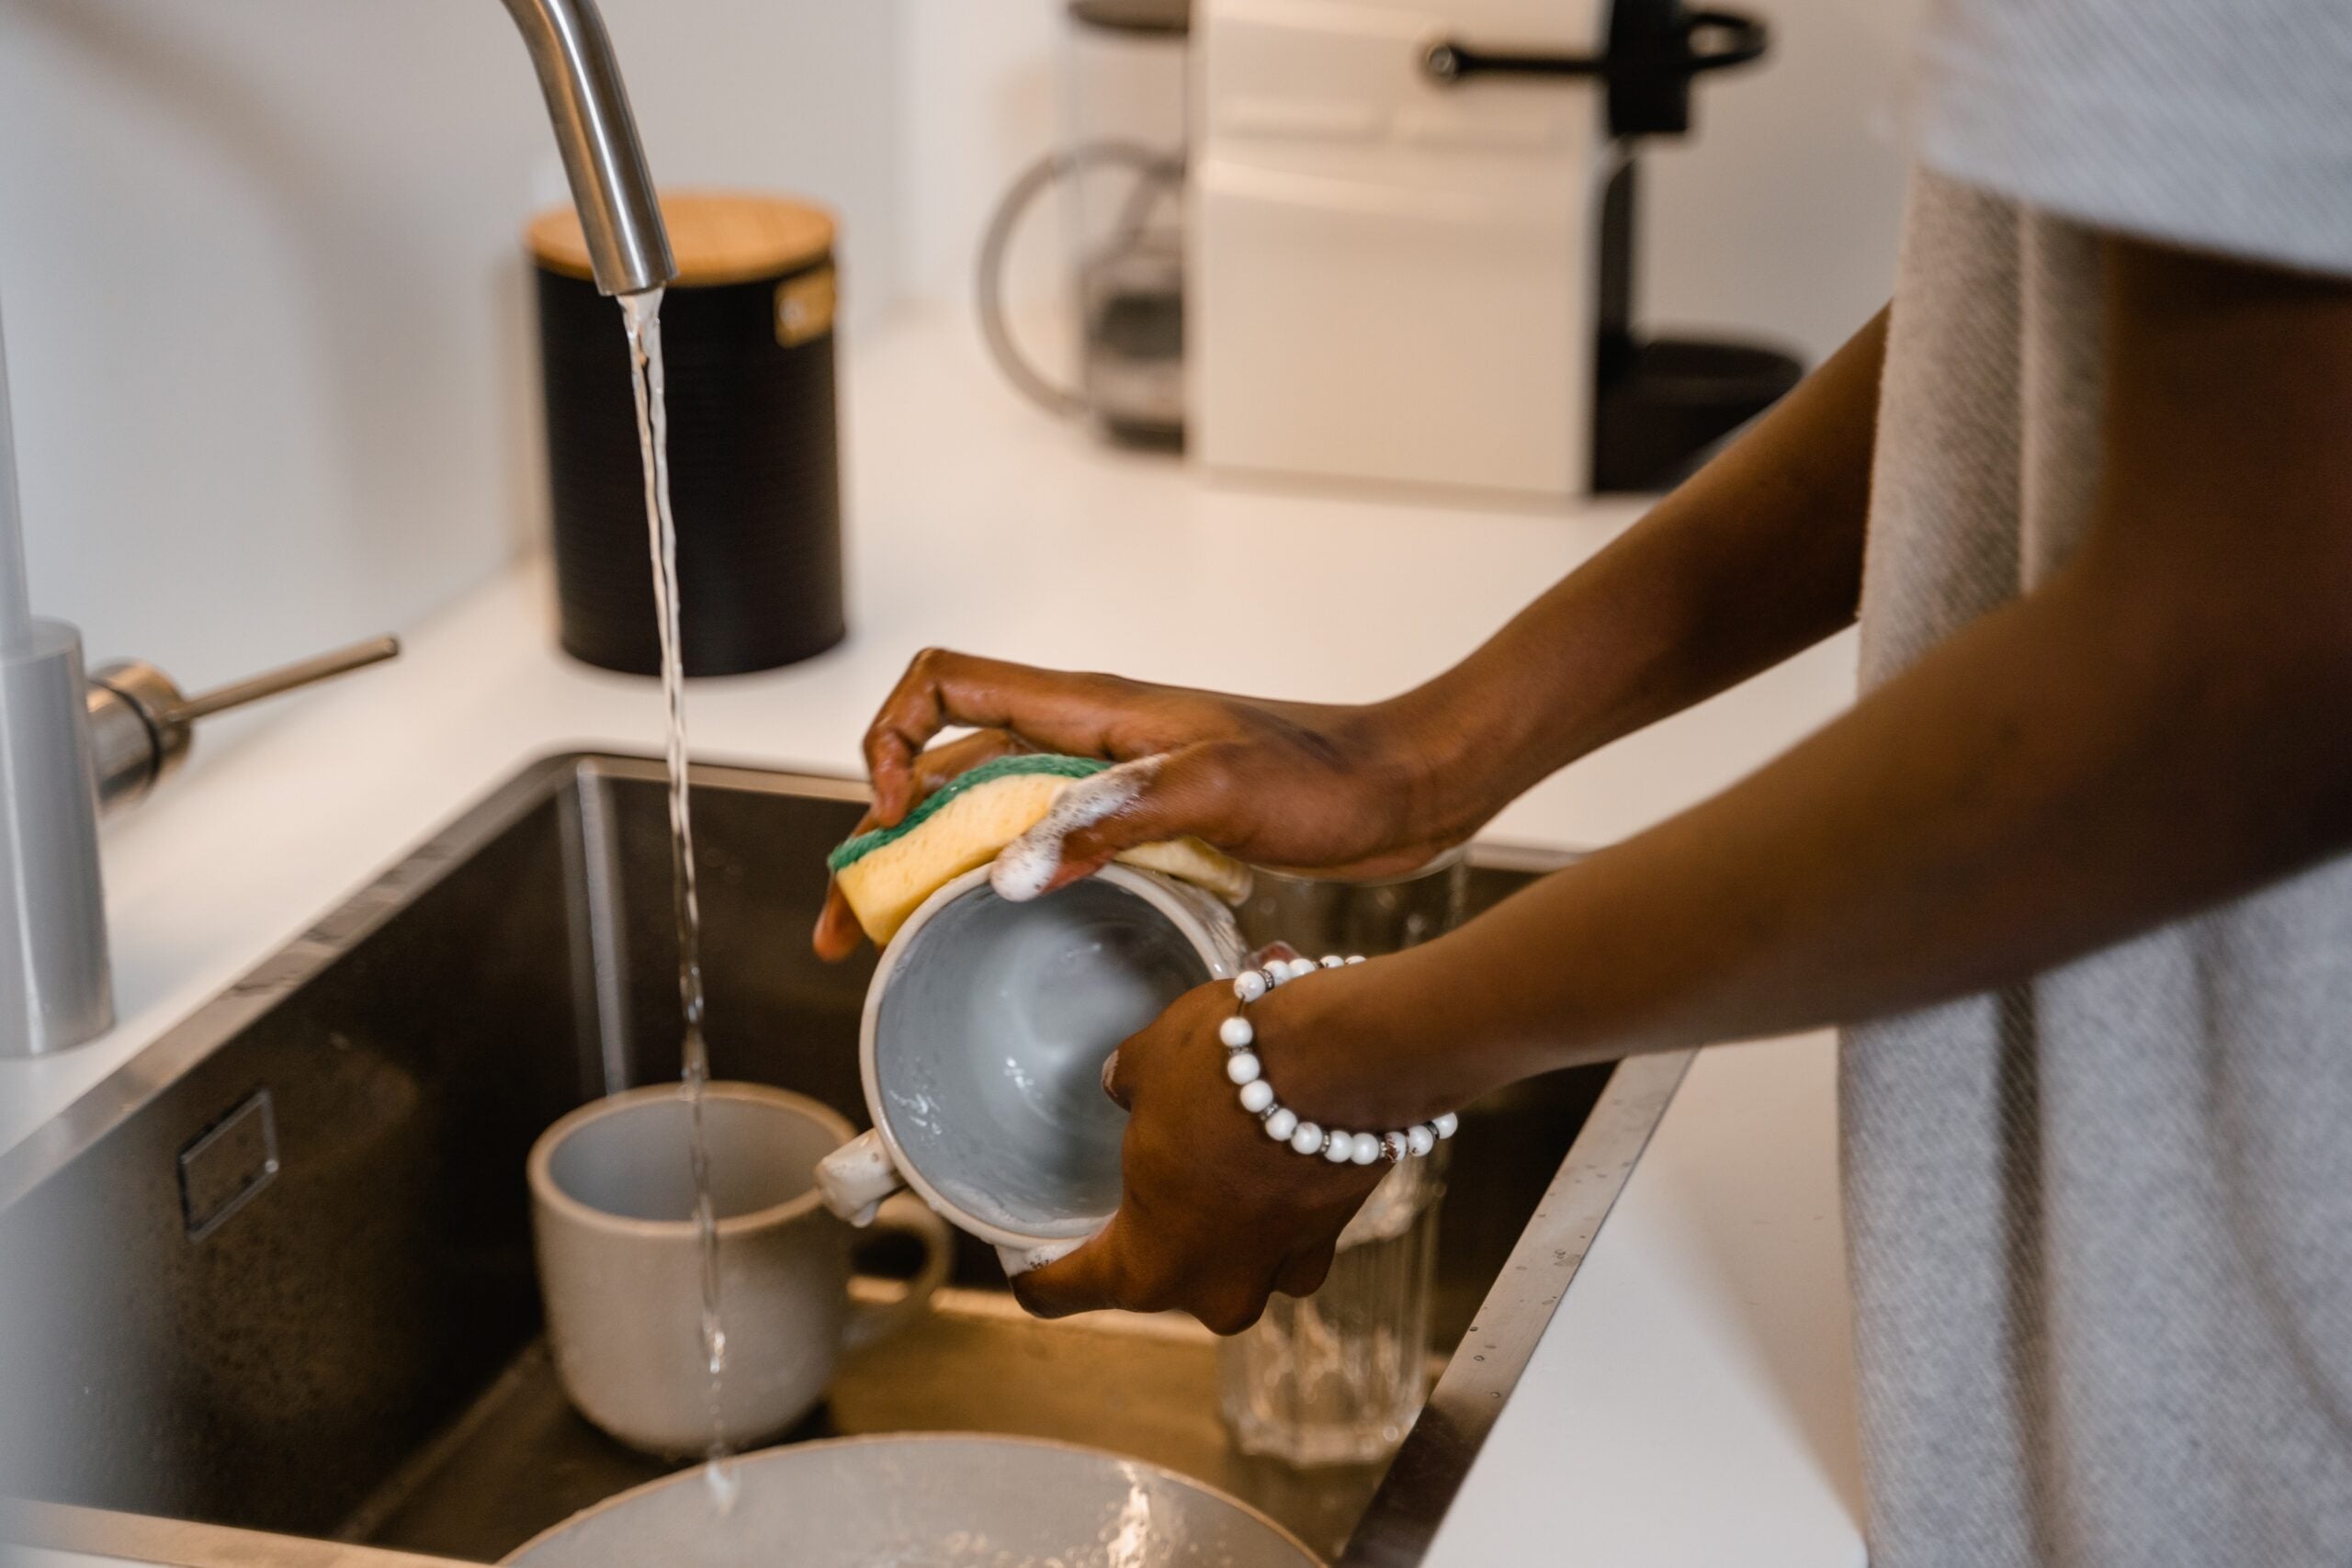 Can we sustainably wash dishes with steam?